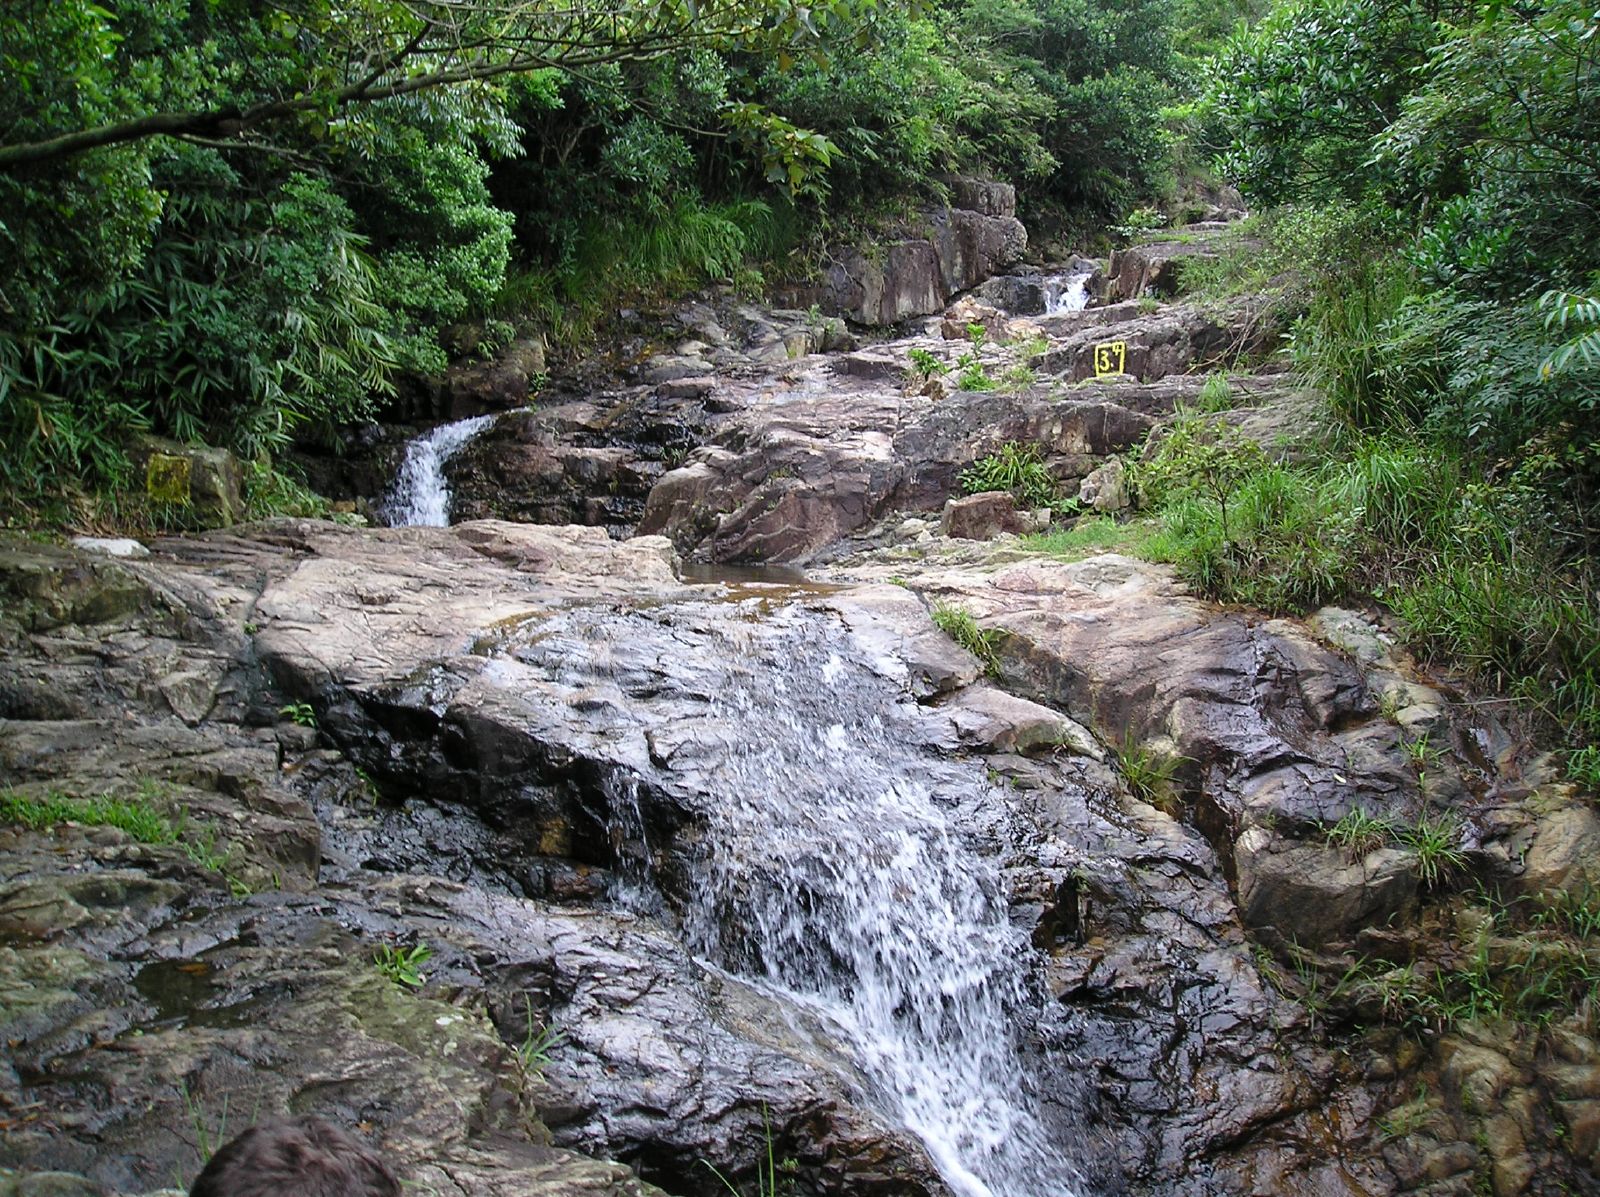 there are many small waterfalls and a stream